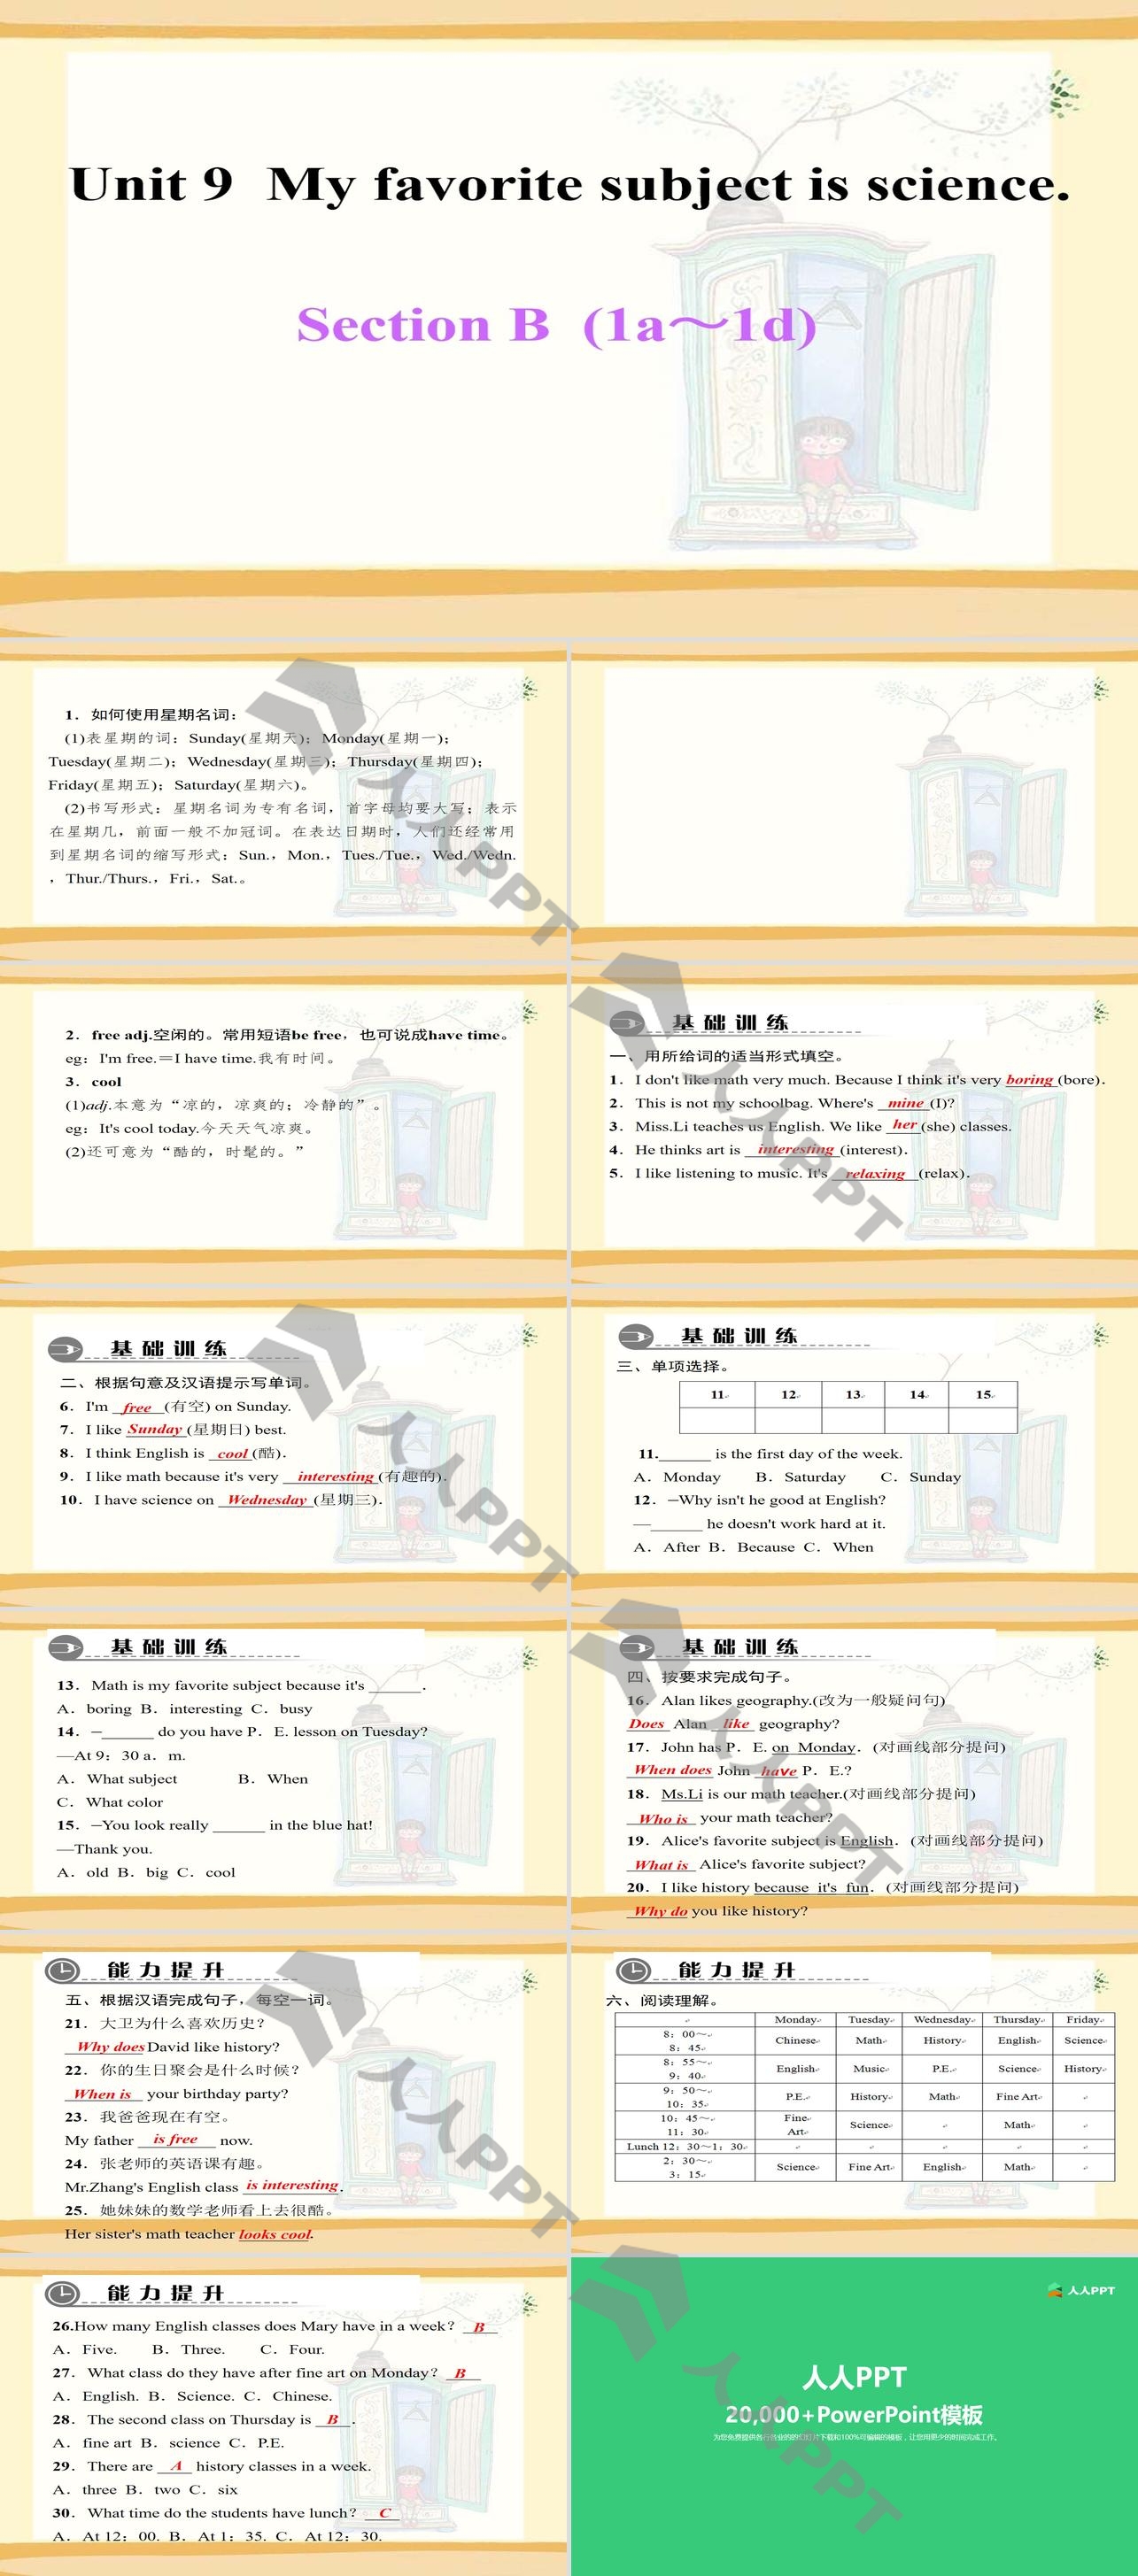 《My favorite subject is science》PPT课件15长图